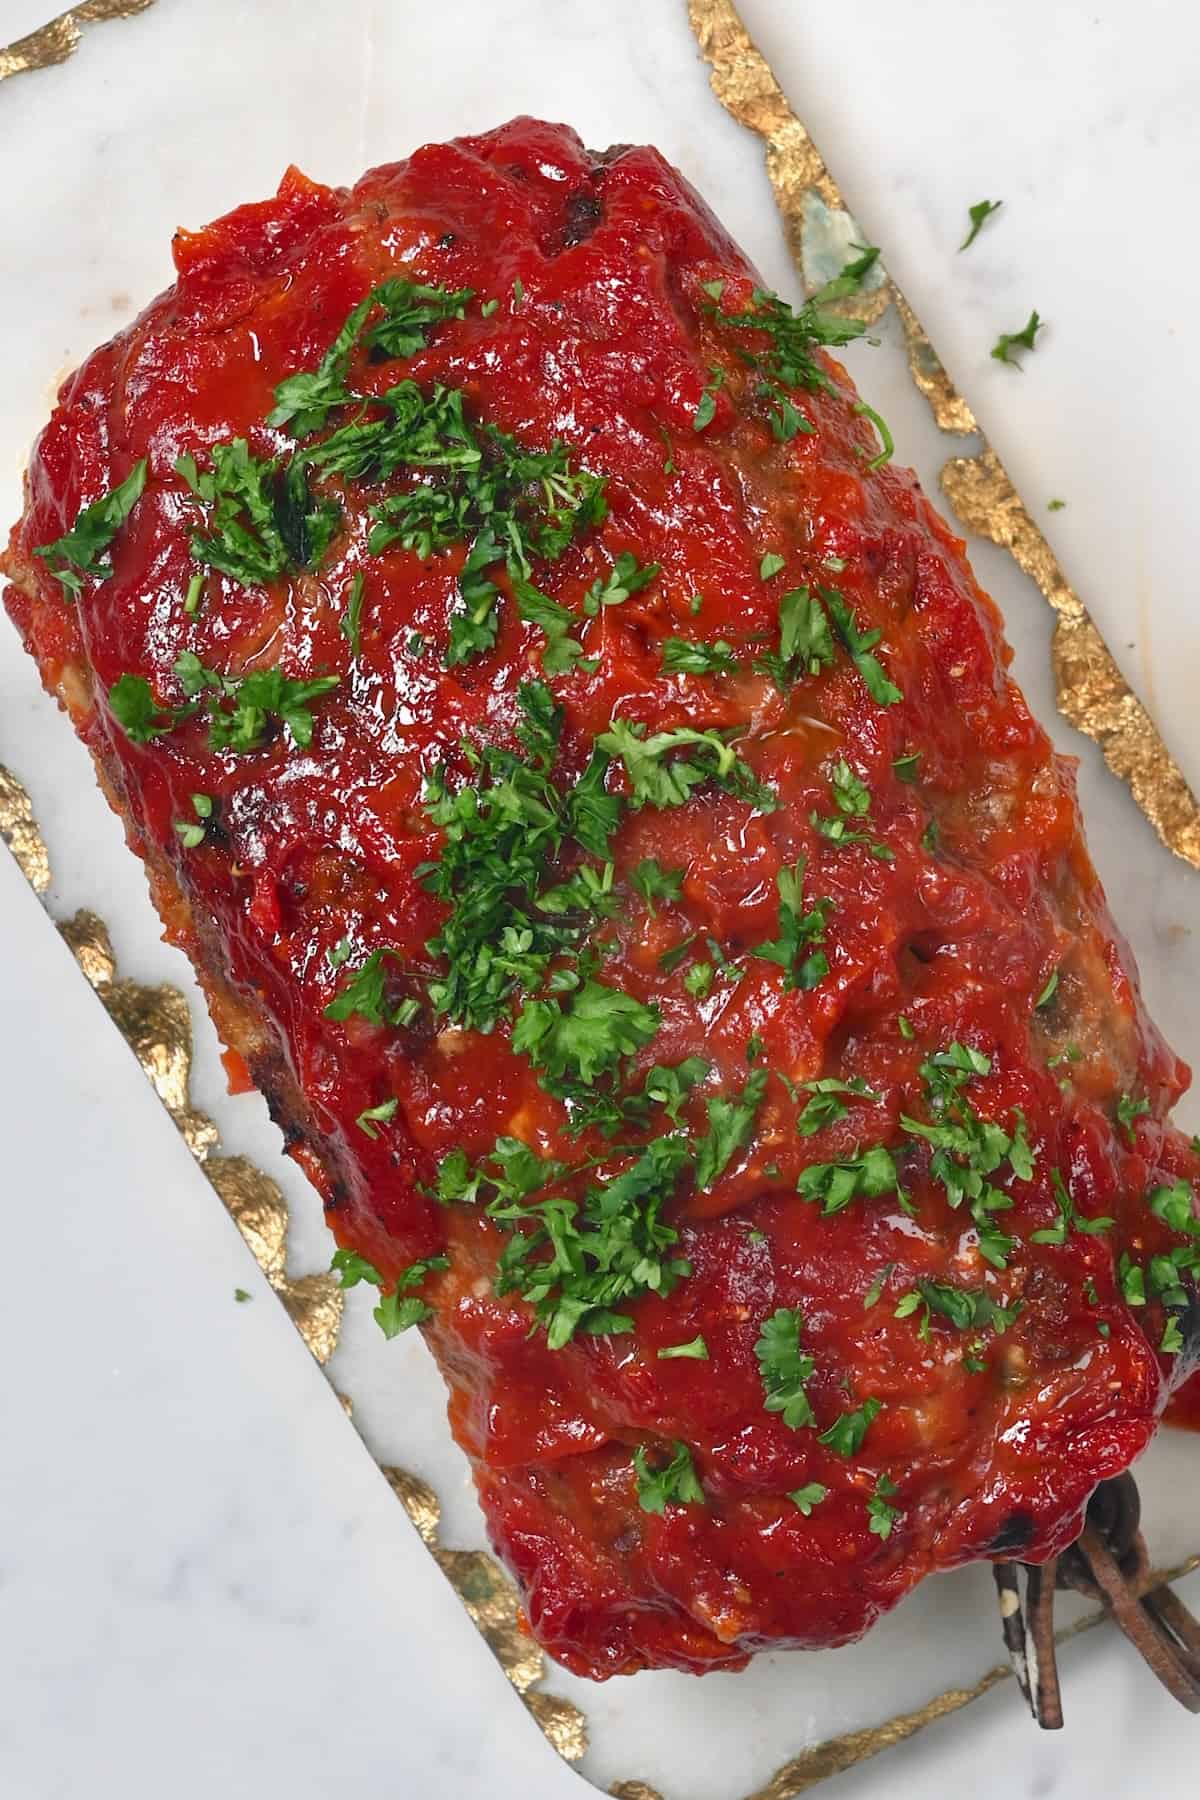 Freshly baked meatloaf topped with tomato glaze